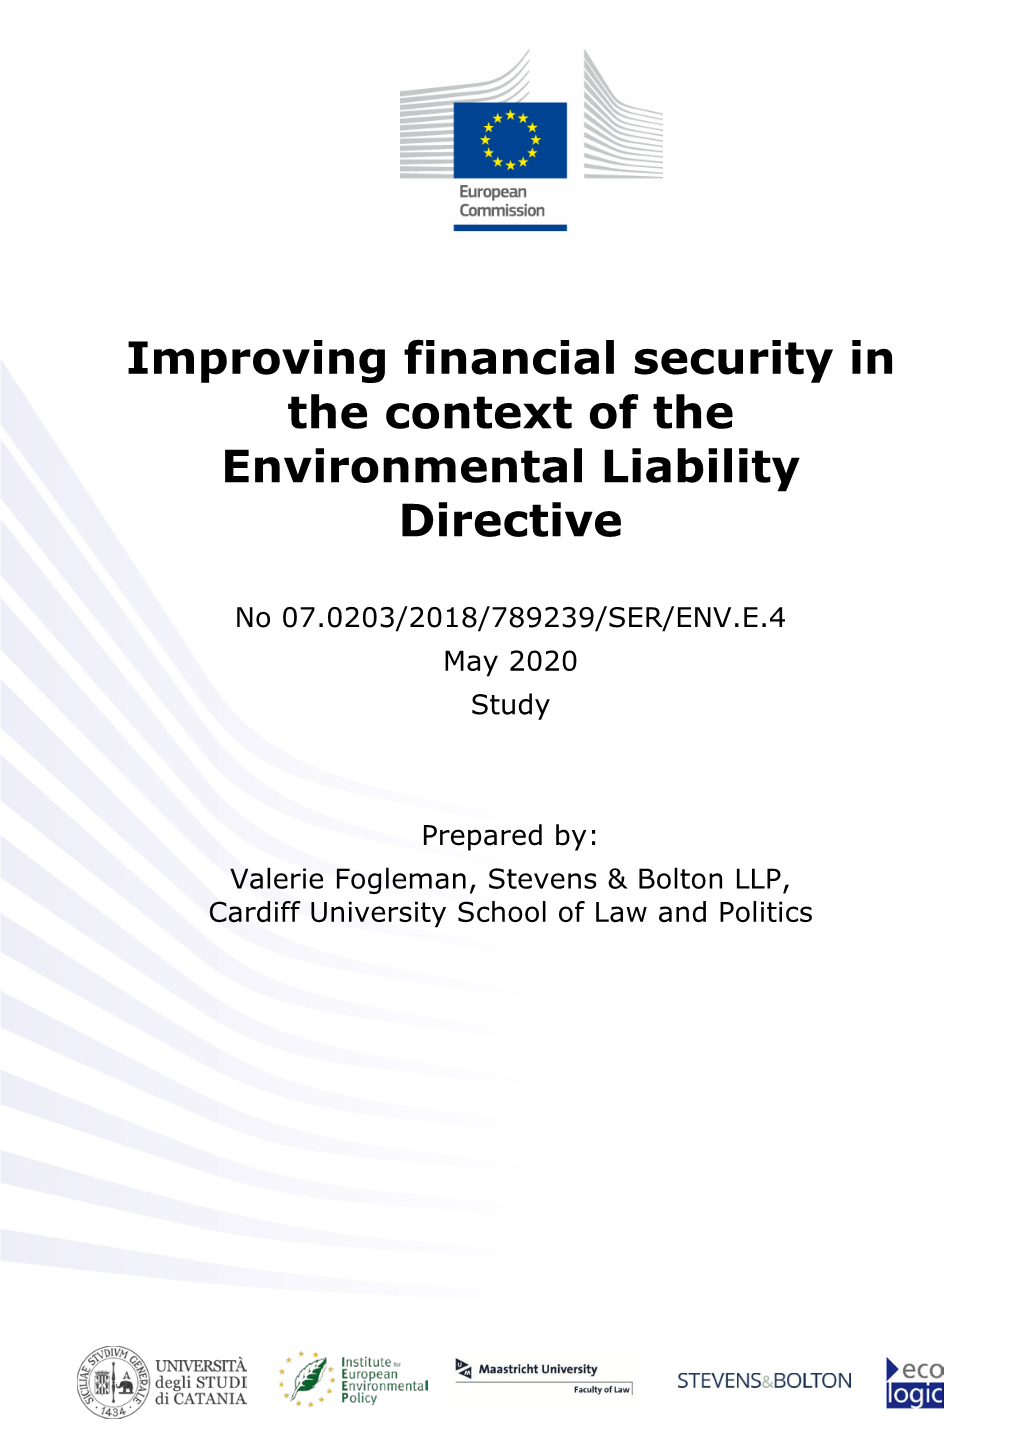 Improving Financial Security in the Context of the Environmental Liability Directive